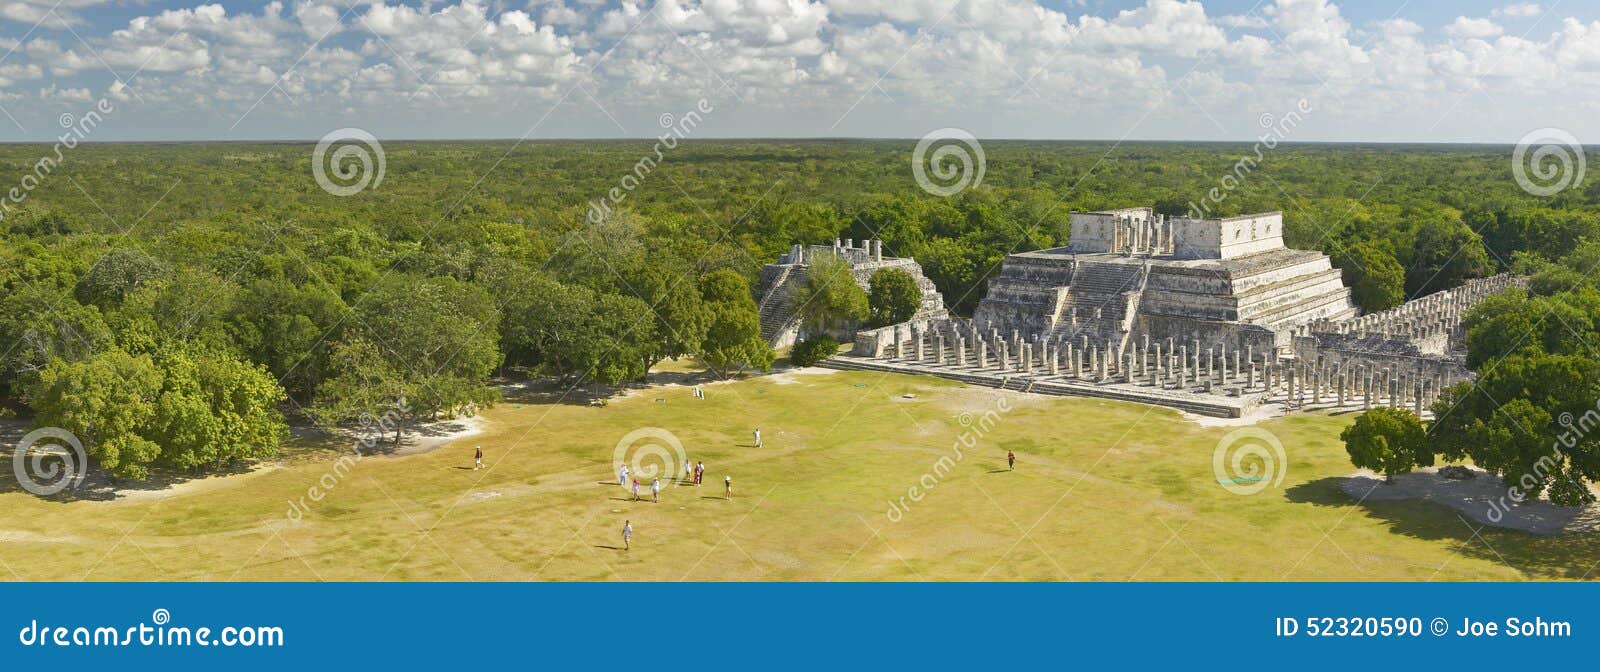 a panoramic view of the temple of the warriors out of jungle at chichen-itza. a mayan ruin, in the yucatan peninsula, mexico